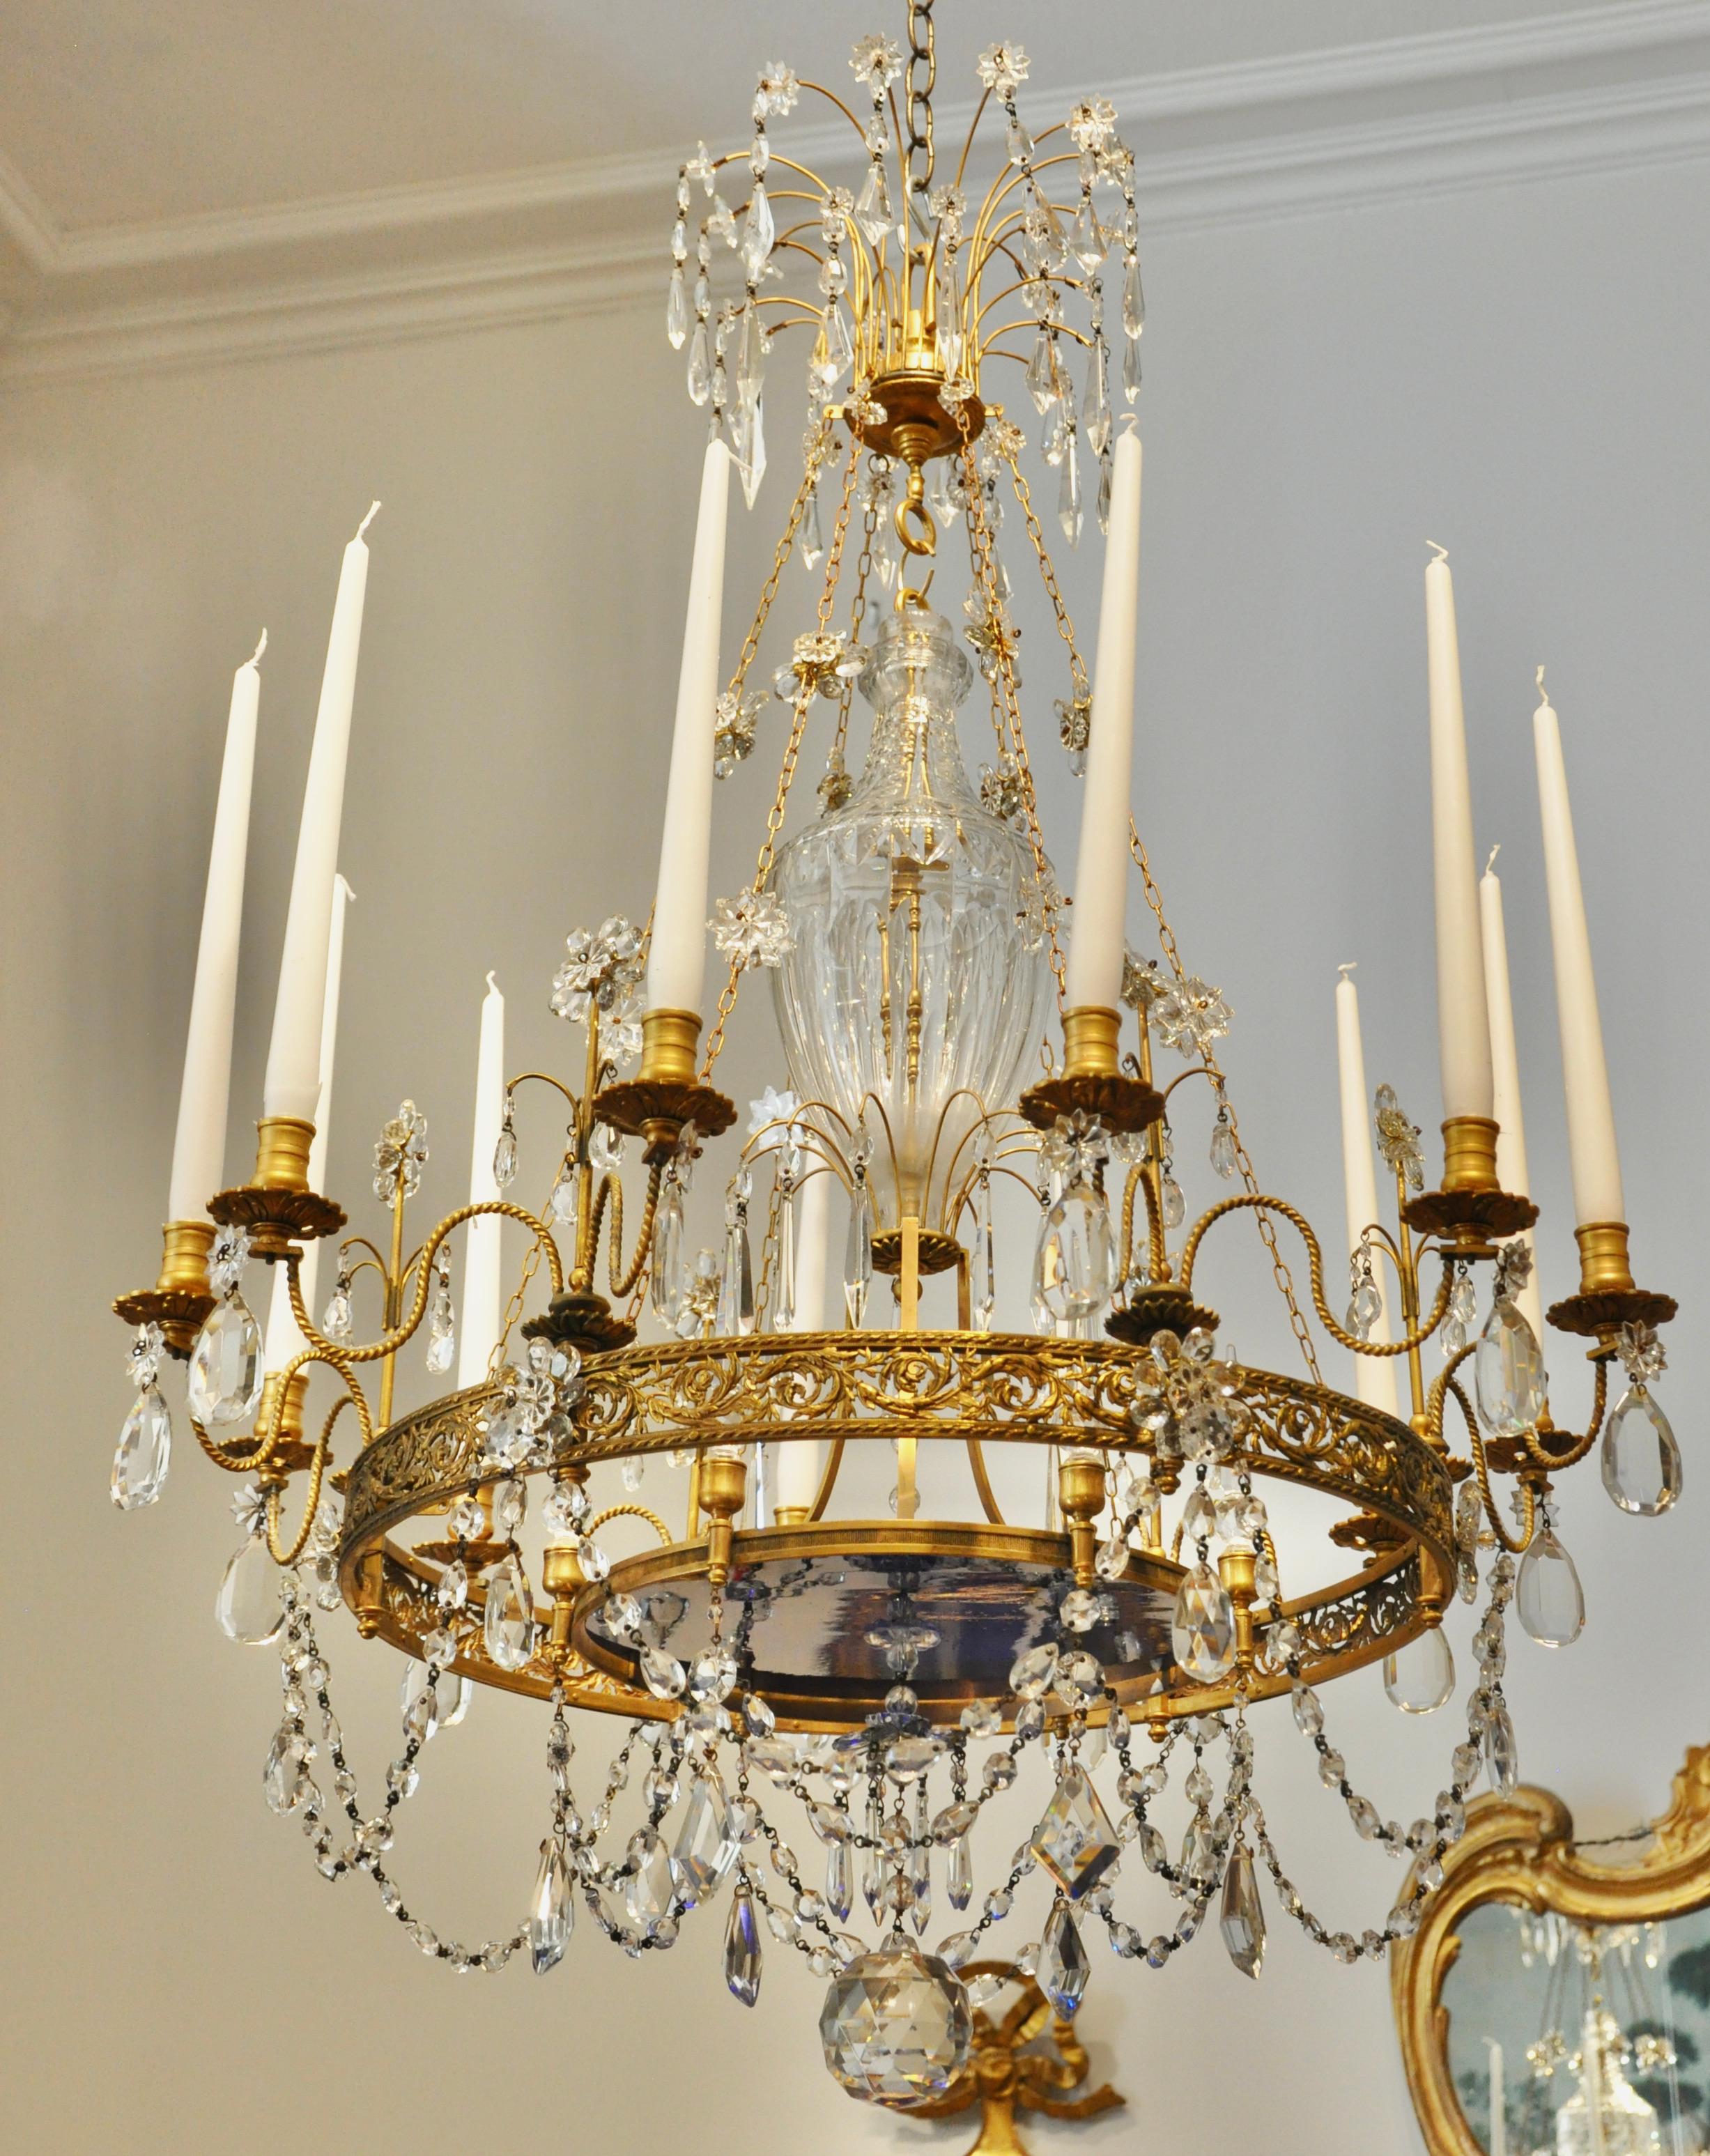 Neoclassical Russian style ormolu and cobalt blue glass chandelier. Wonderful form with crystal flowers and reticulated gilt bronze work

Provenance: The Waldorf Astoria New York

Will be French wired for US Standard Electricity.